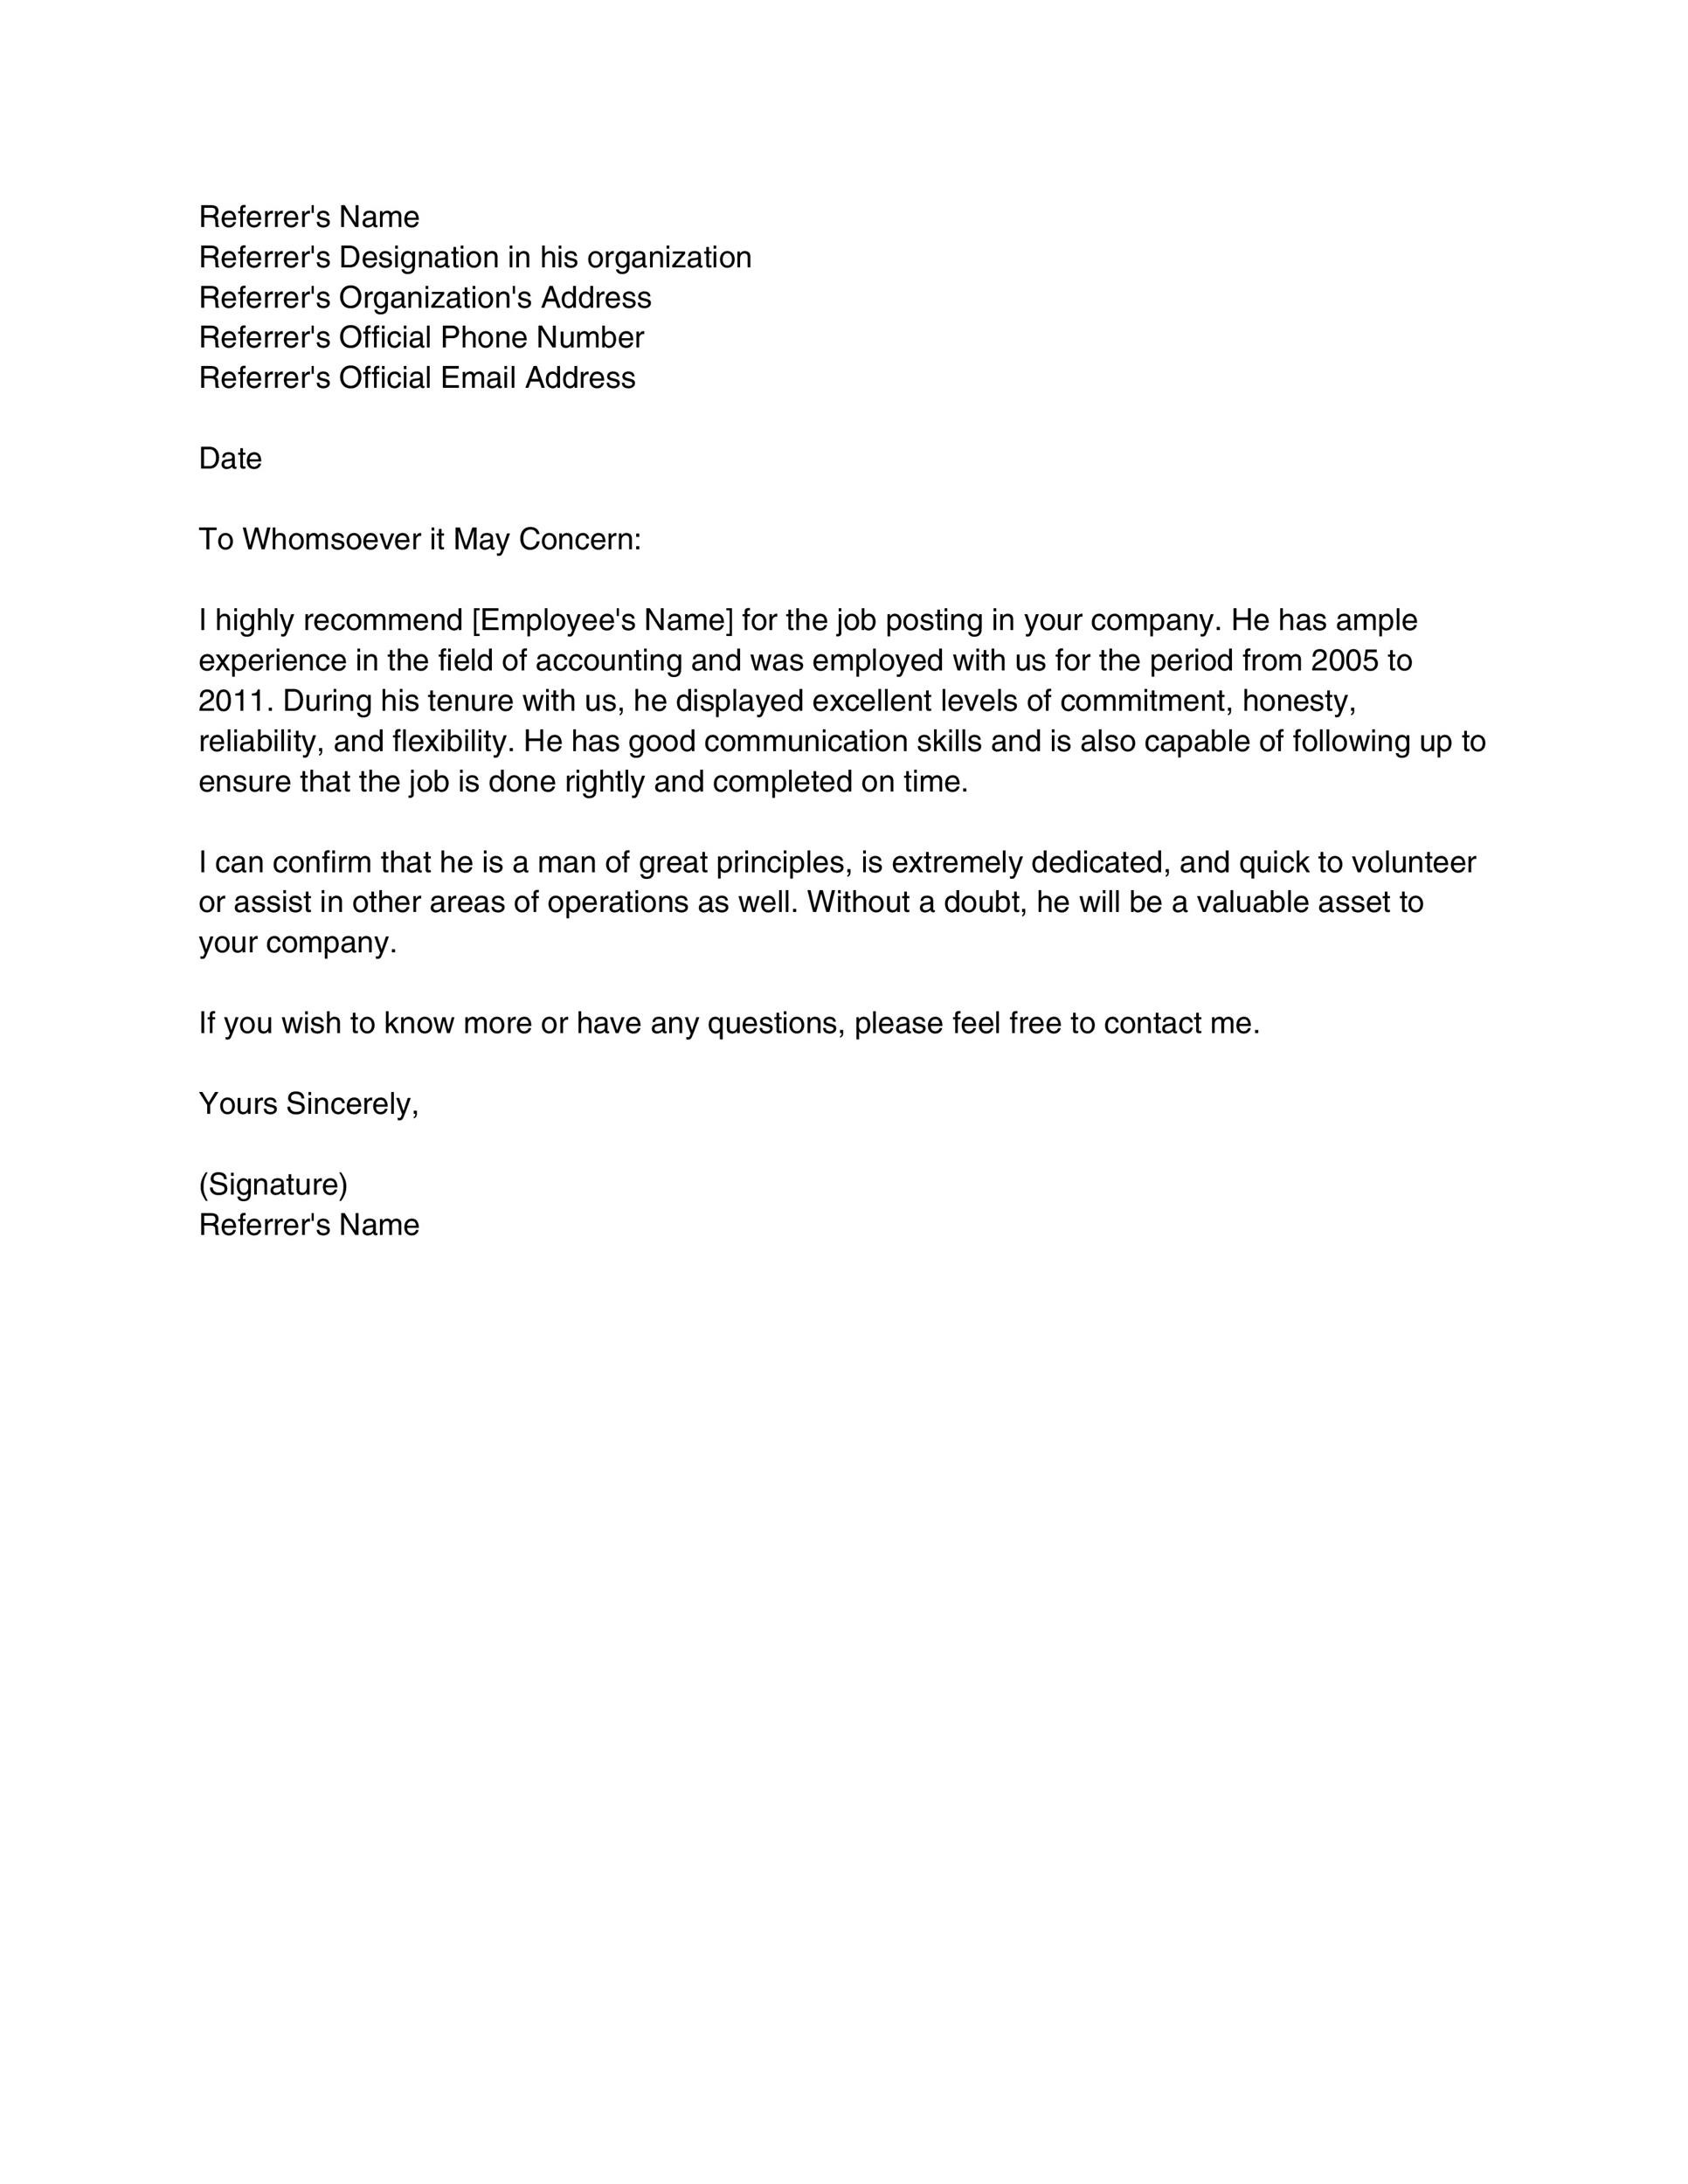 Letter Of Support For Tenure Template from templatelab.com